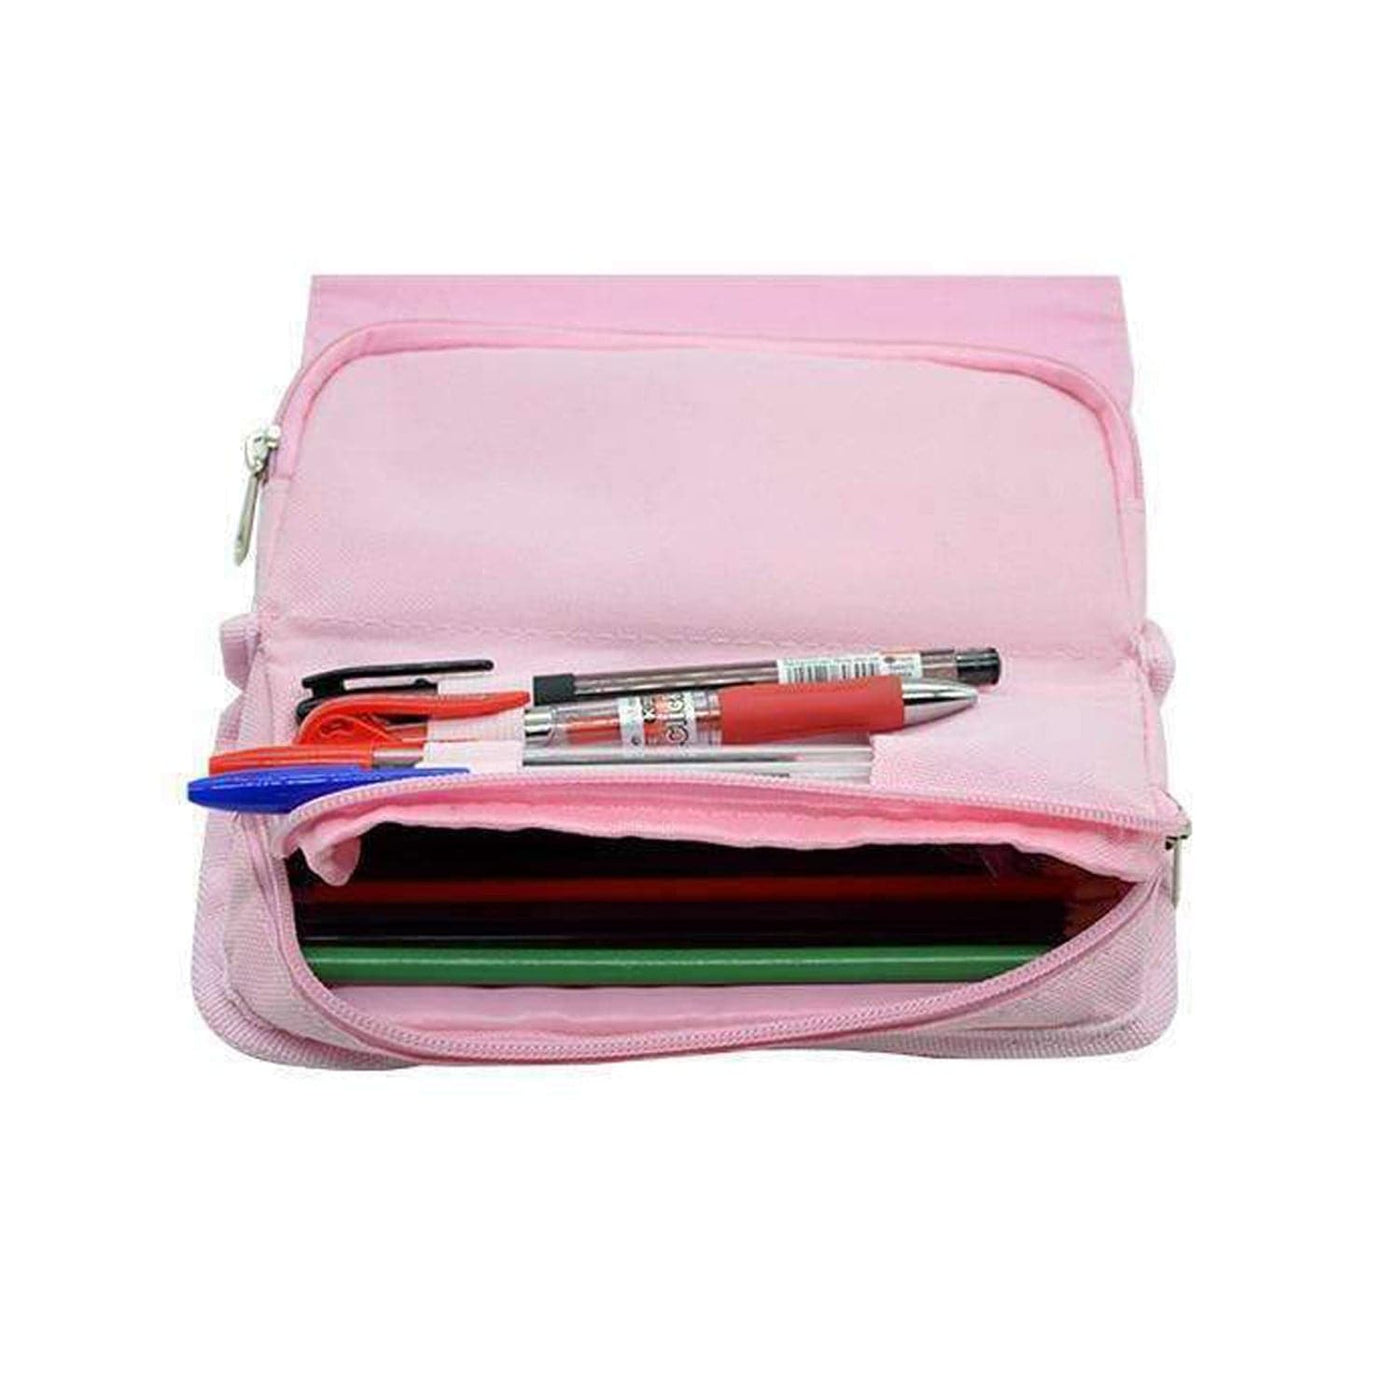 Ruby And Doctor - Doctor Who Pencil Case